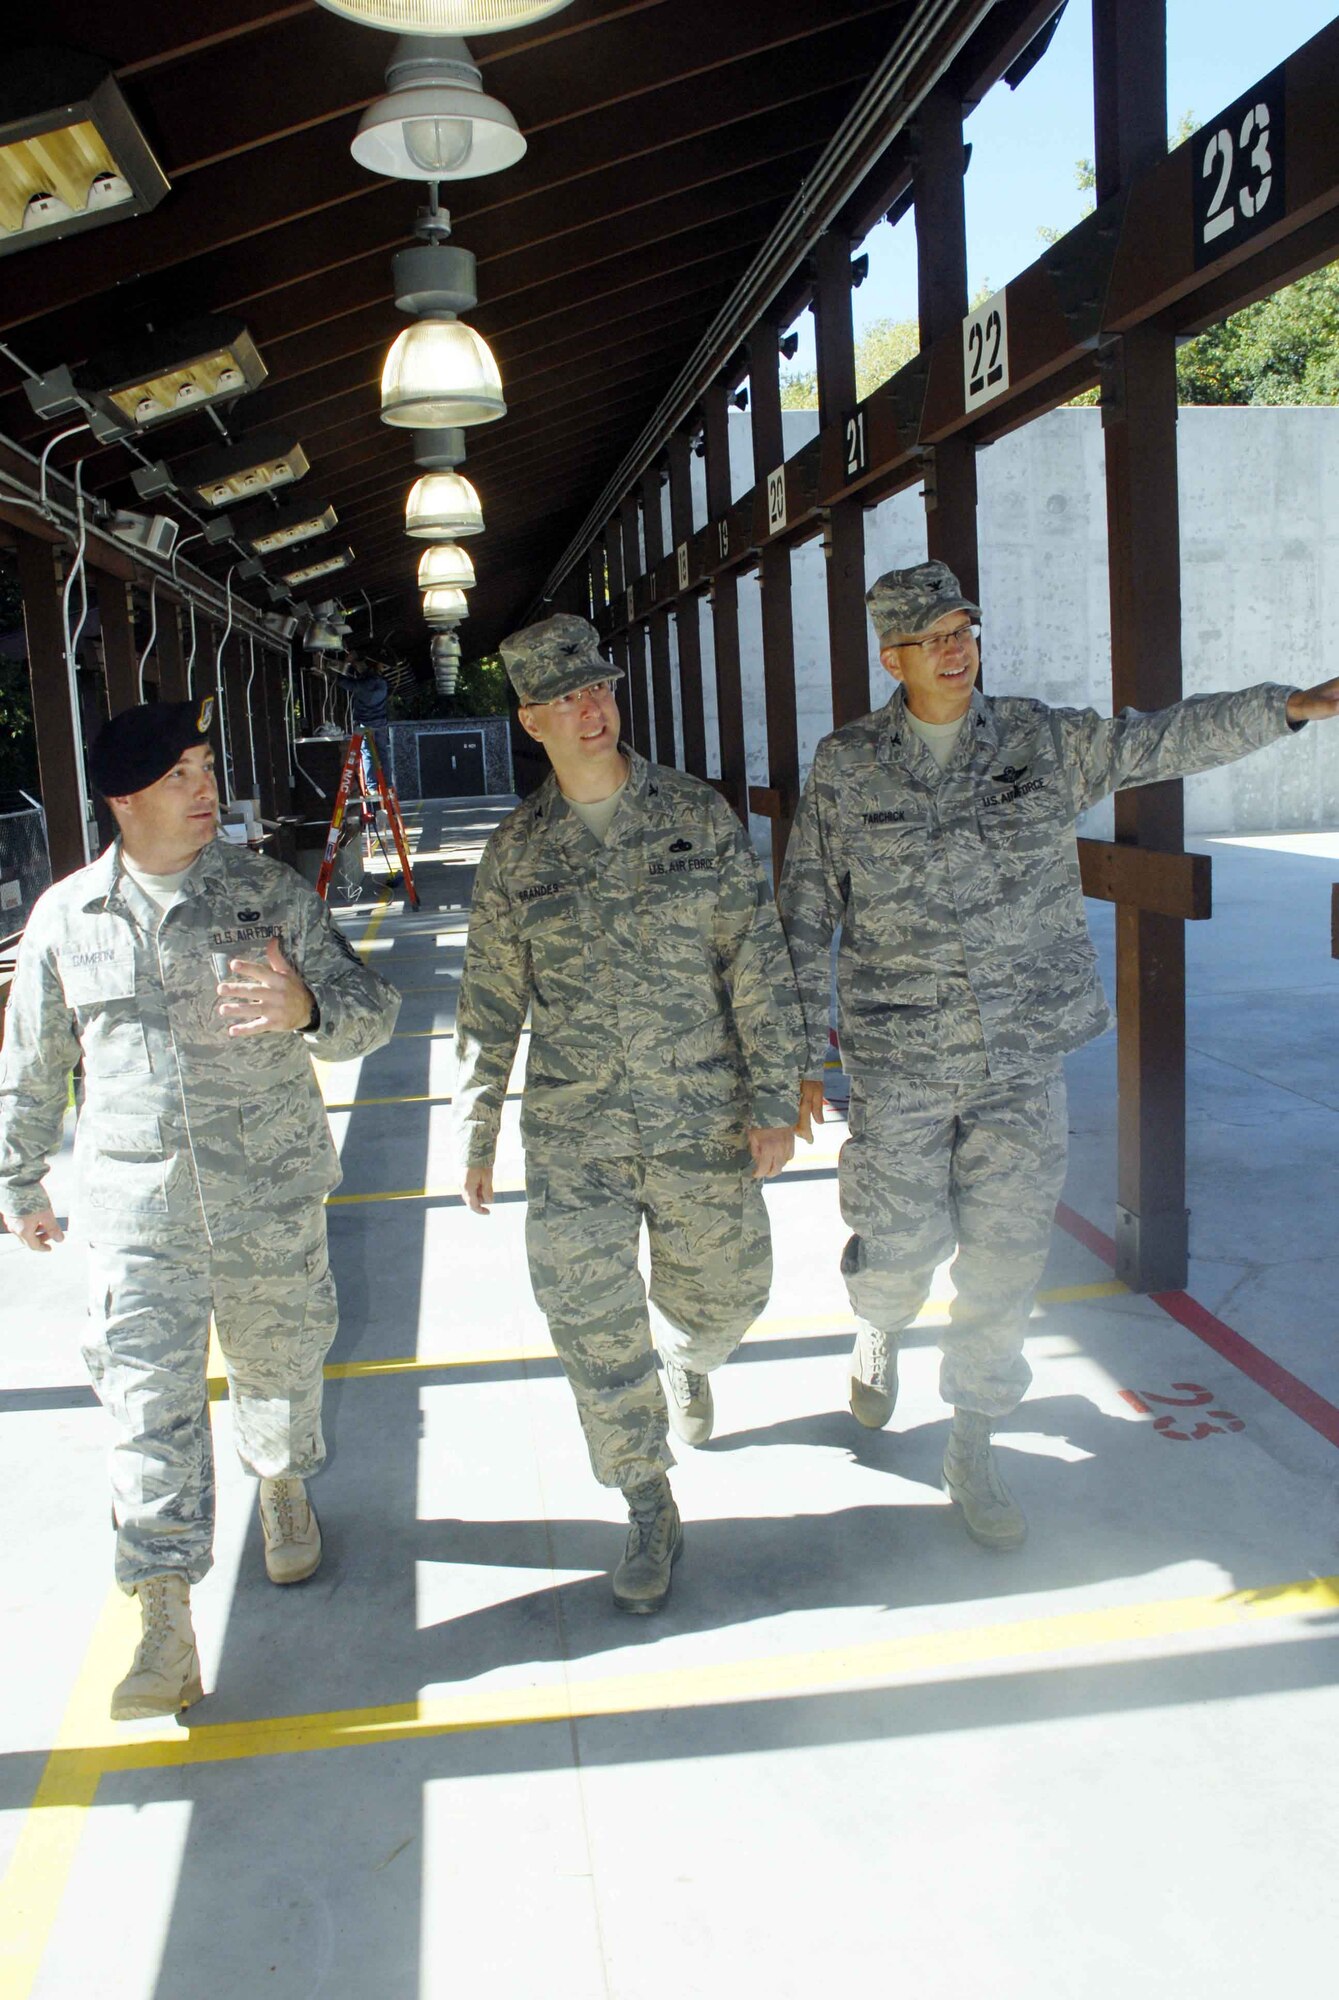 From left, Master Sgt. Tony Gamboni, 934th Security Forces Squadron, gives a tour of the new firing range to Col. Eric Brandes, 934th Maintenance Group commander, and Col. Tim Tarchick, 934th Airlift Wing commander.  The facility is now open and features heated firing stations and steel bullet traps with automated scavenging systems to recover spent ammunition. (Air Force photo/Master Sgt. Paul Zadach